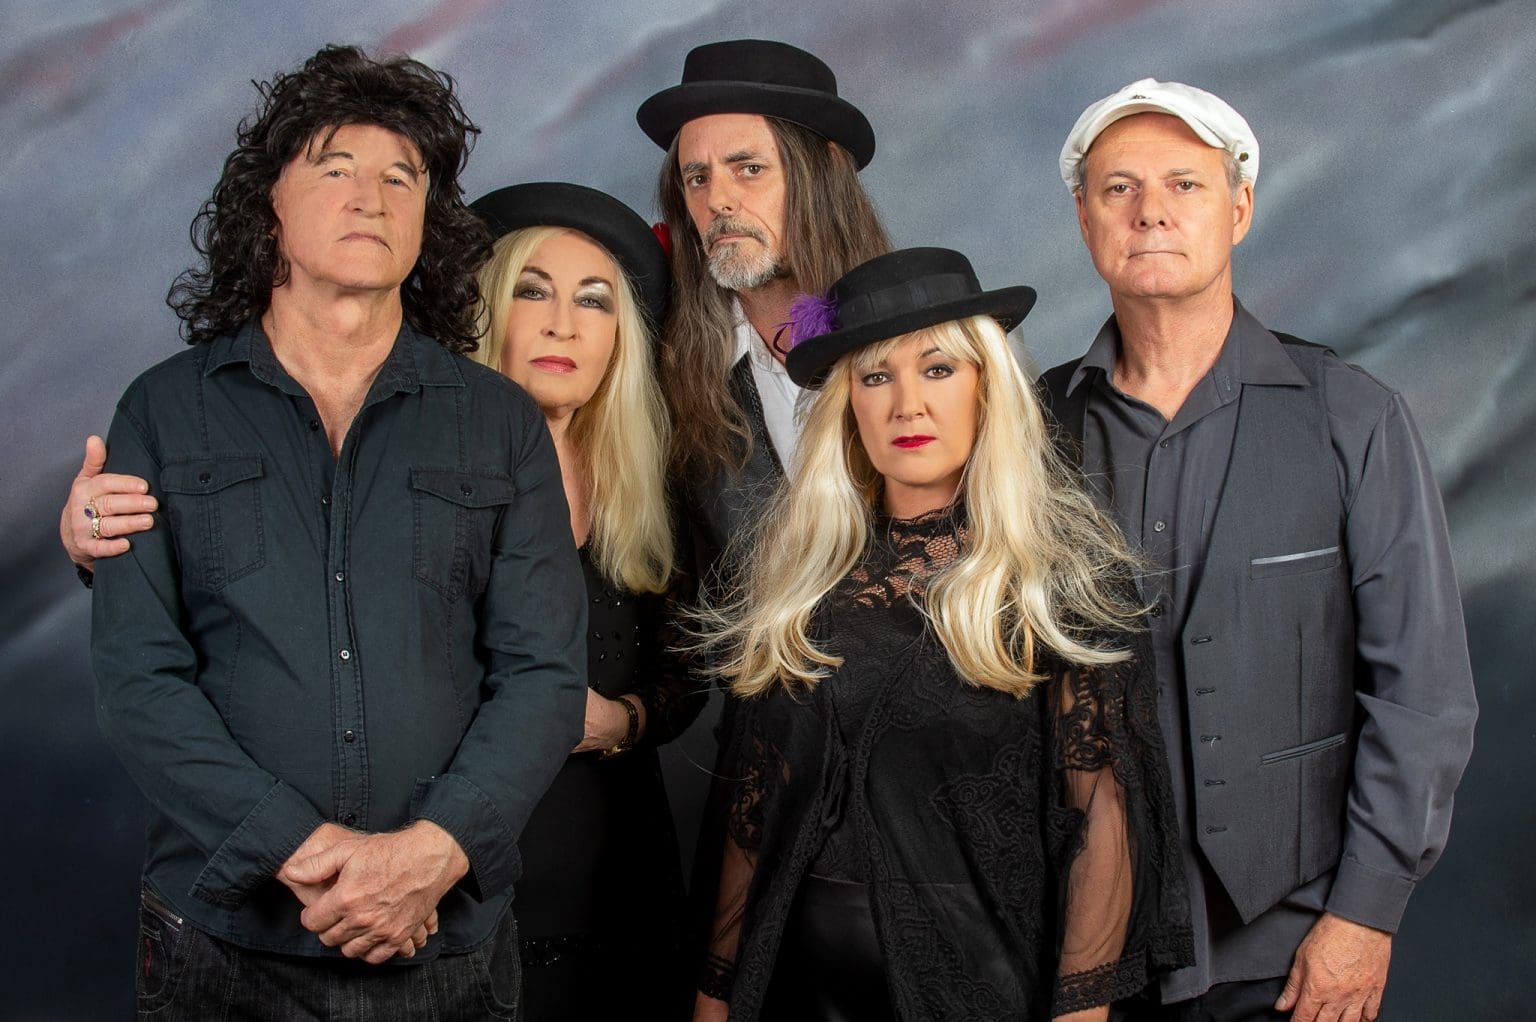 Rumours The Australian Fleetwood Mac Experience a Tribute Show The